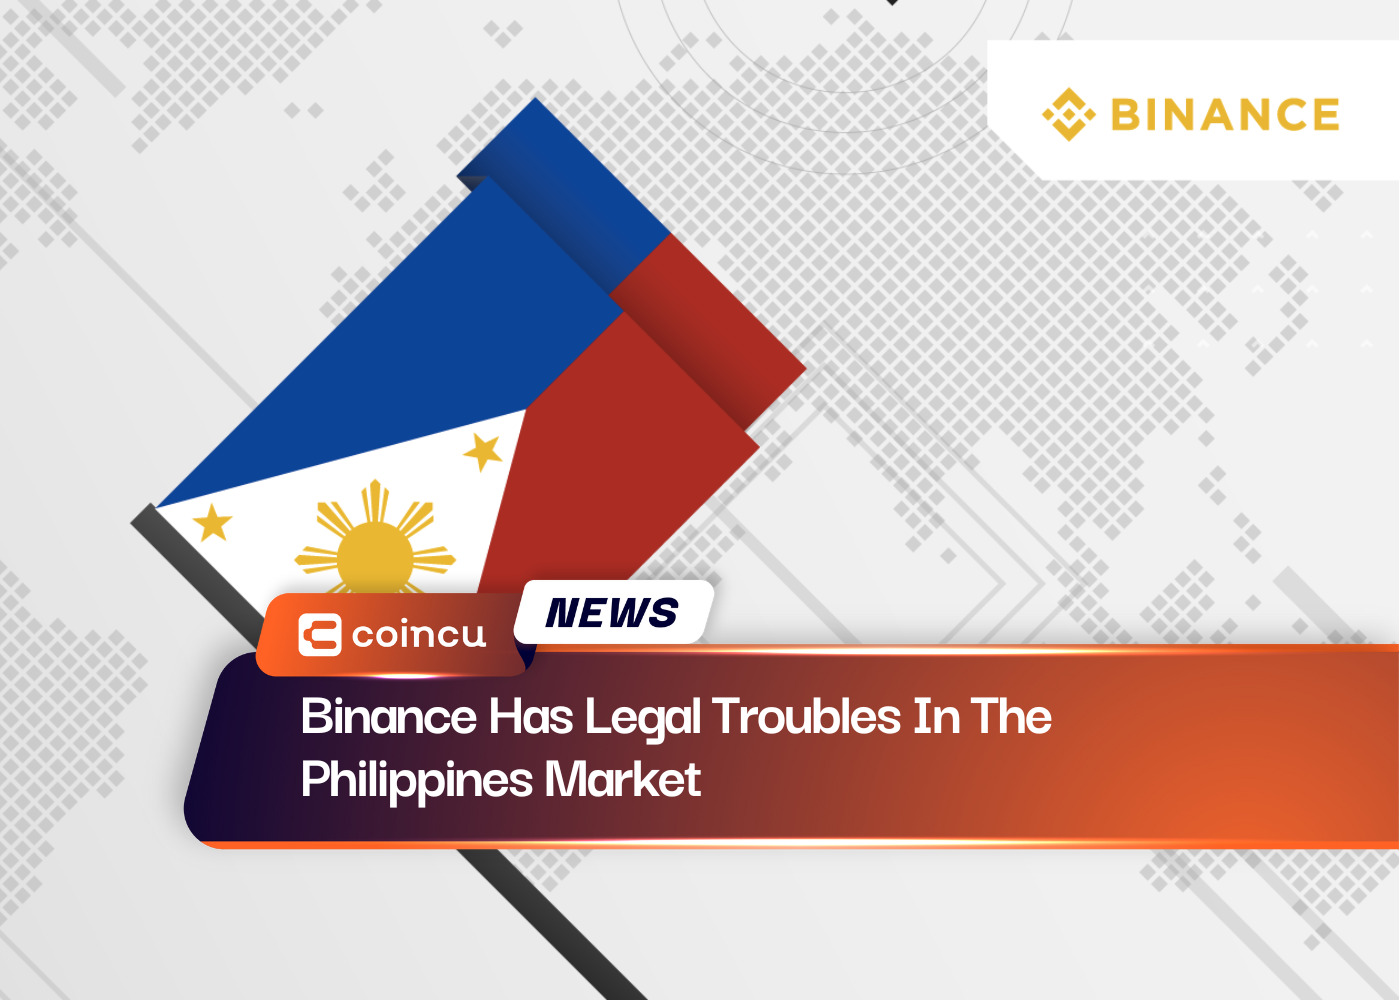 Binance Has Legal Troubles In The Philippines Market